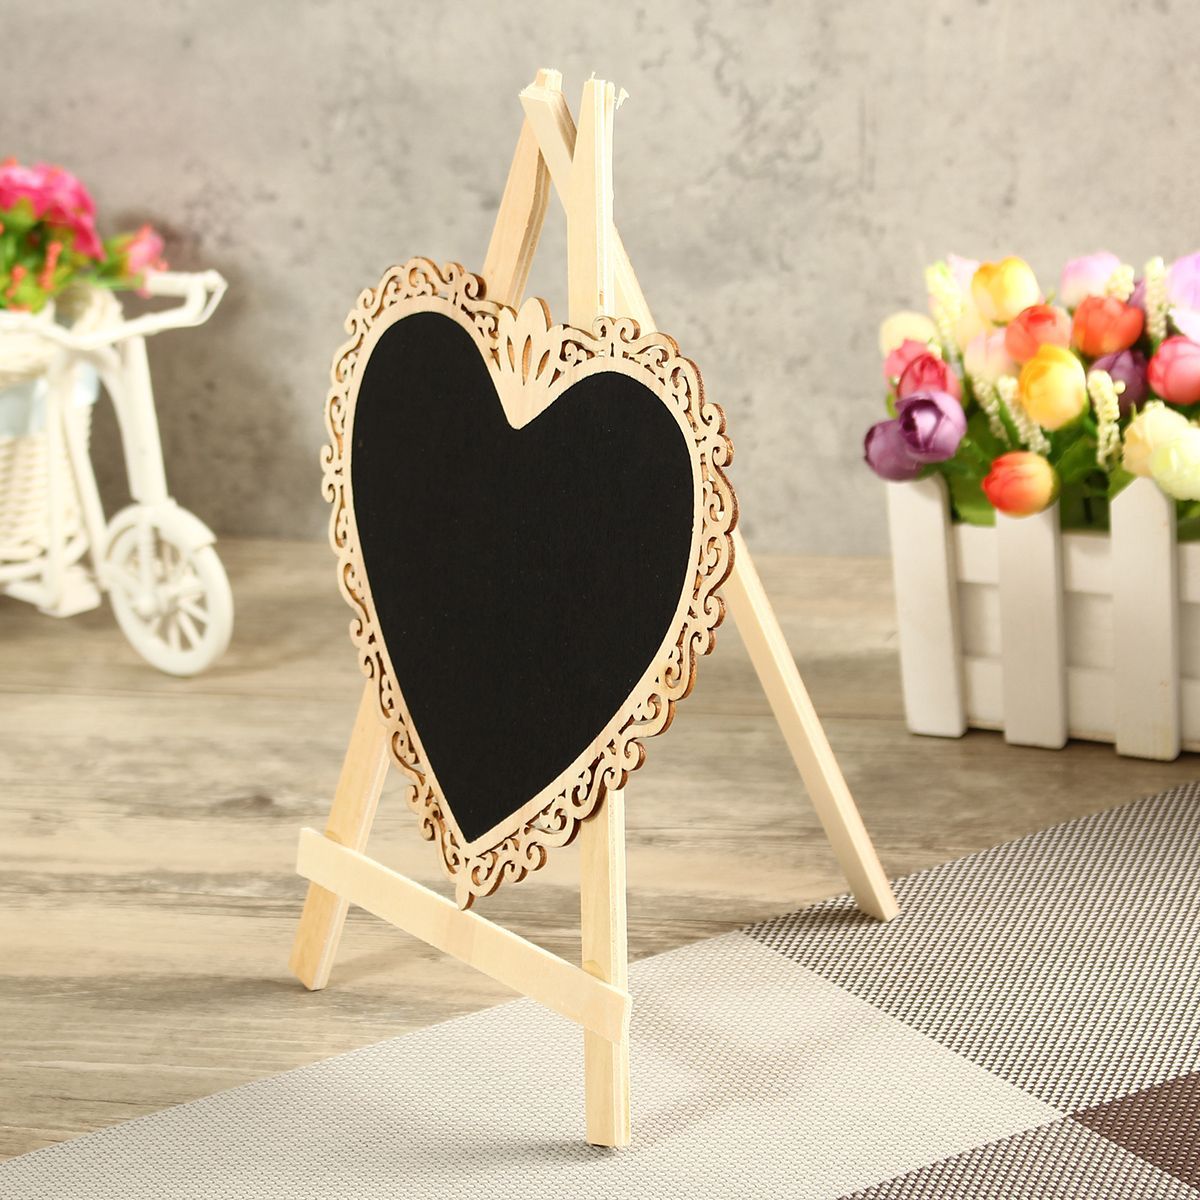 Mini-Vintage-Wooden-Blackboard-Table-Number-Signs-Message-Memo-Chalk-Board-Party-Decorations-1392943